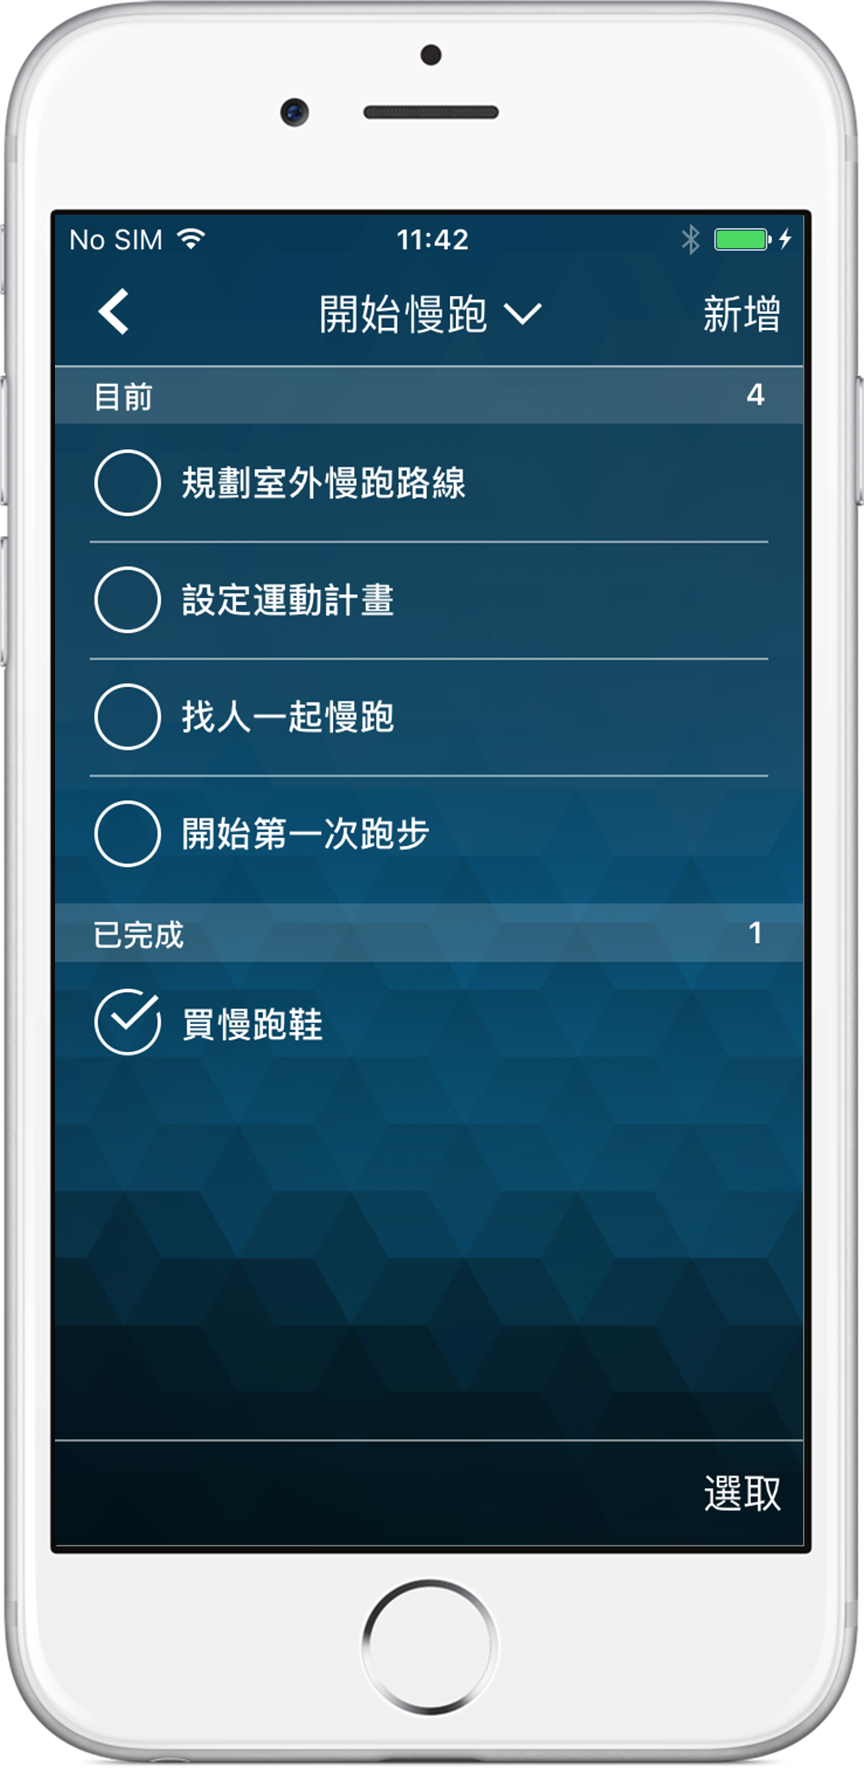 iPhone 版 Time Pro - To-do list